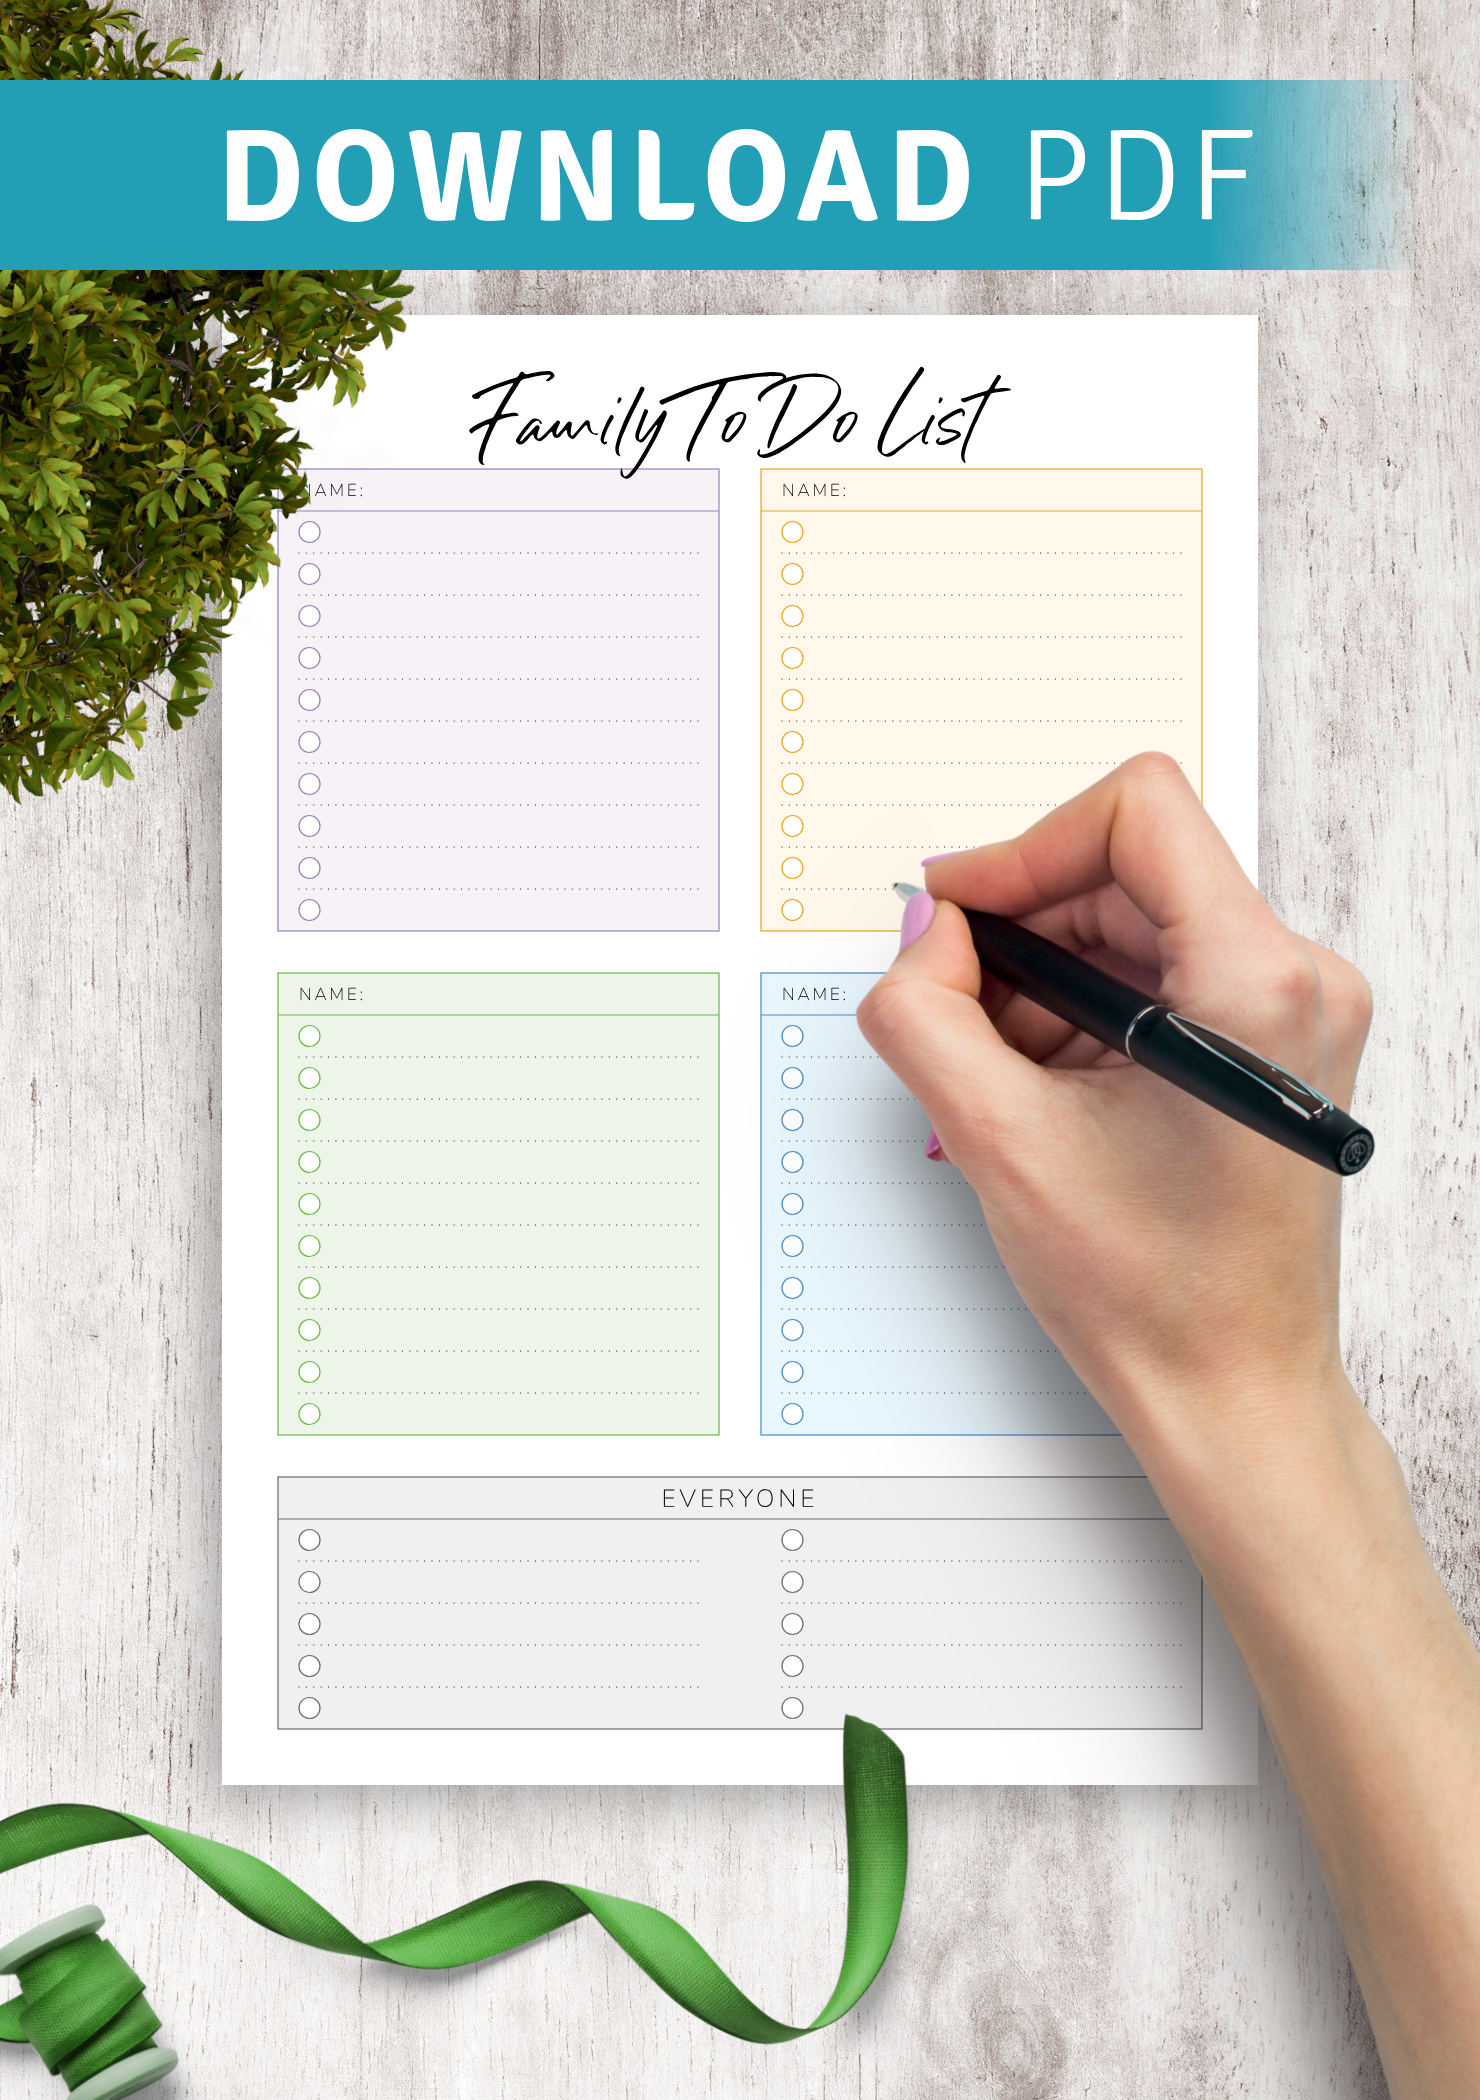 Download Printable Family To Do List for Four Persons PDF